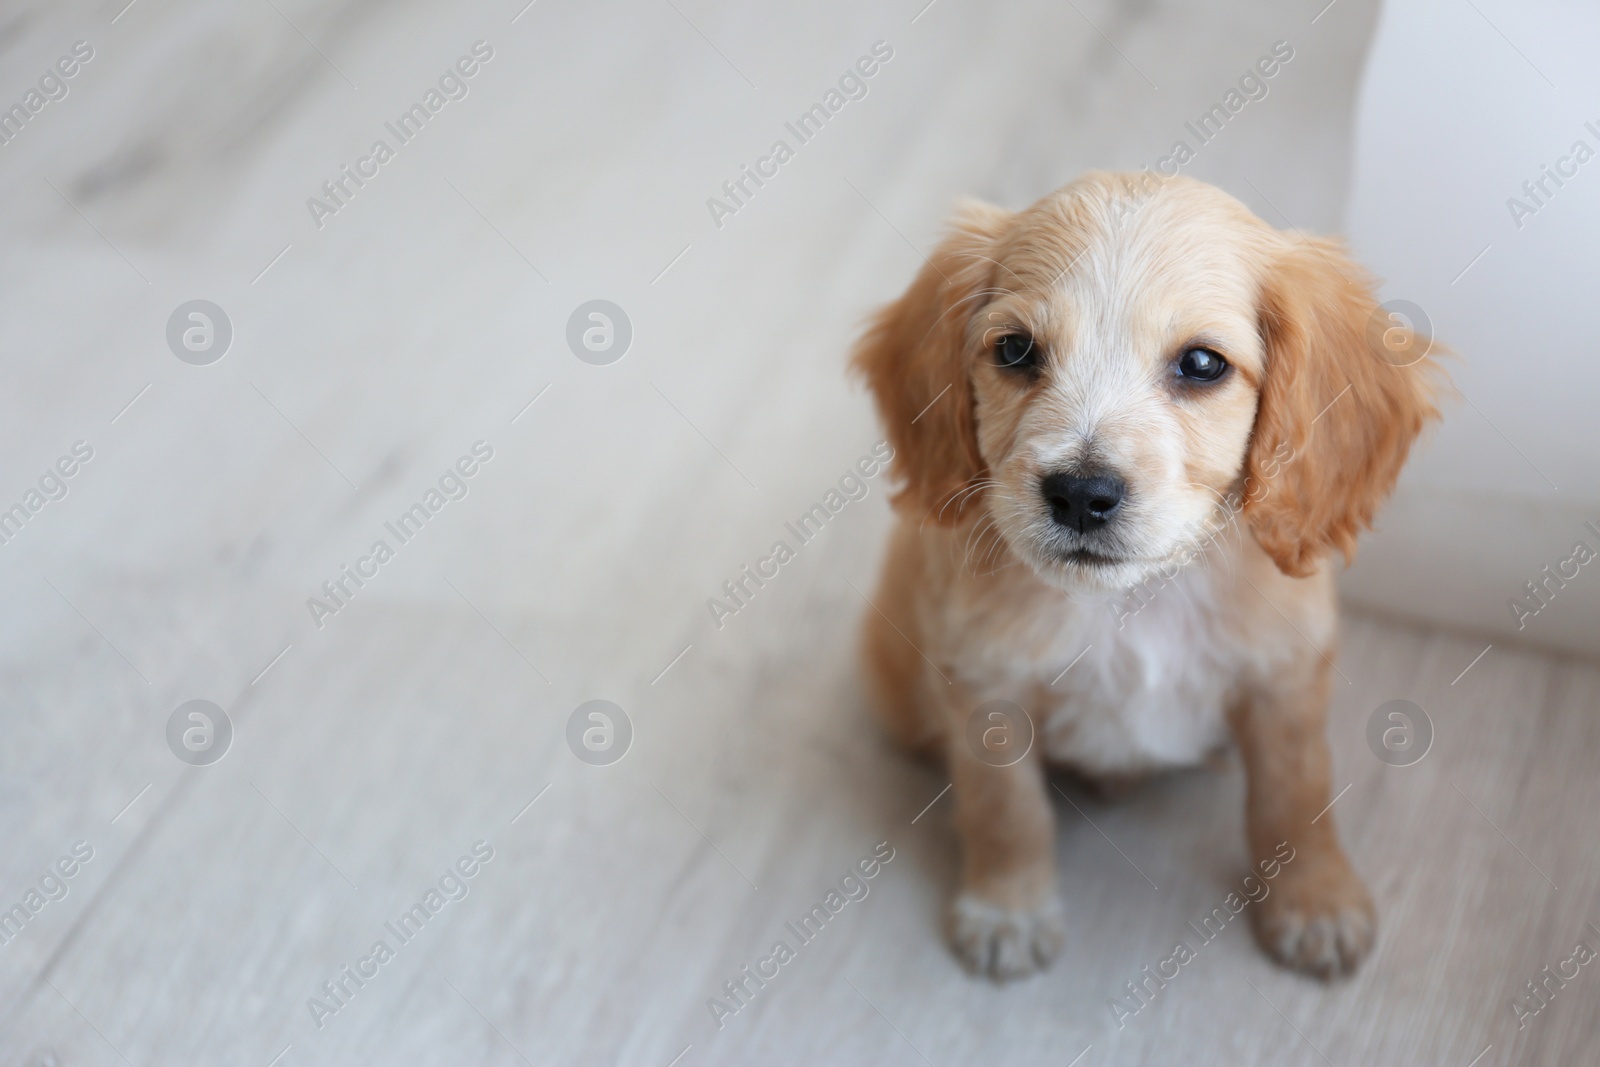 Photo of Cute English Cocker Spaniel puppy sitting on floor indoors. Space for text